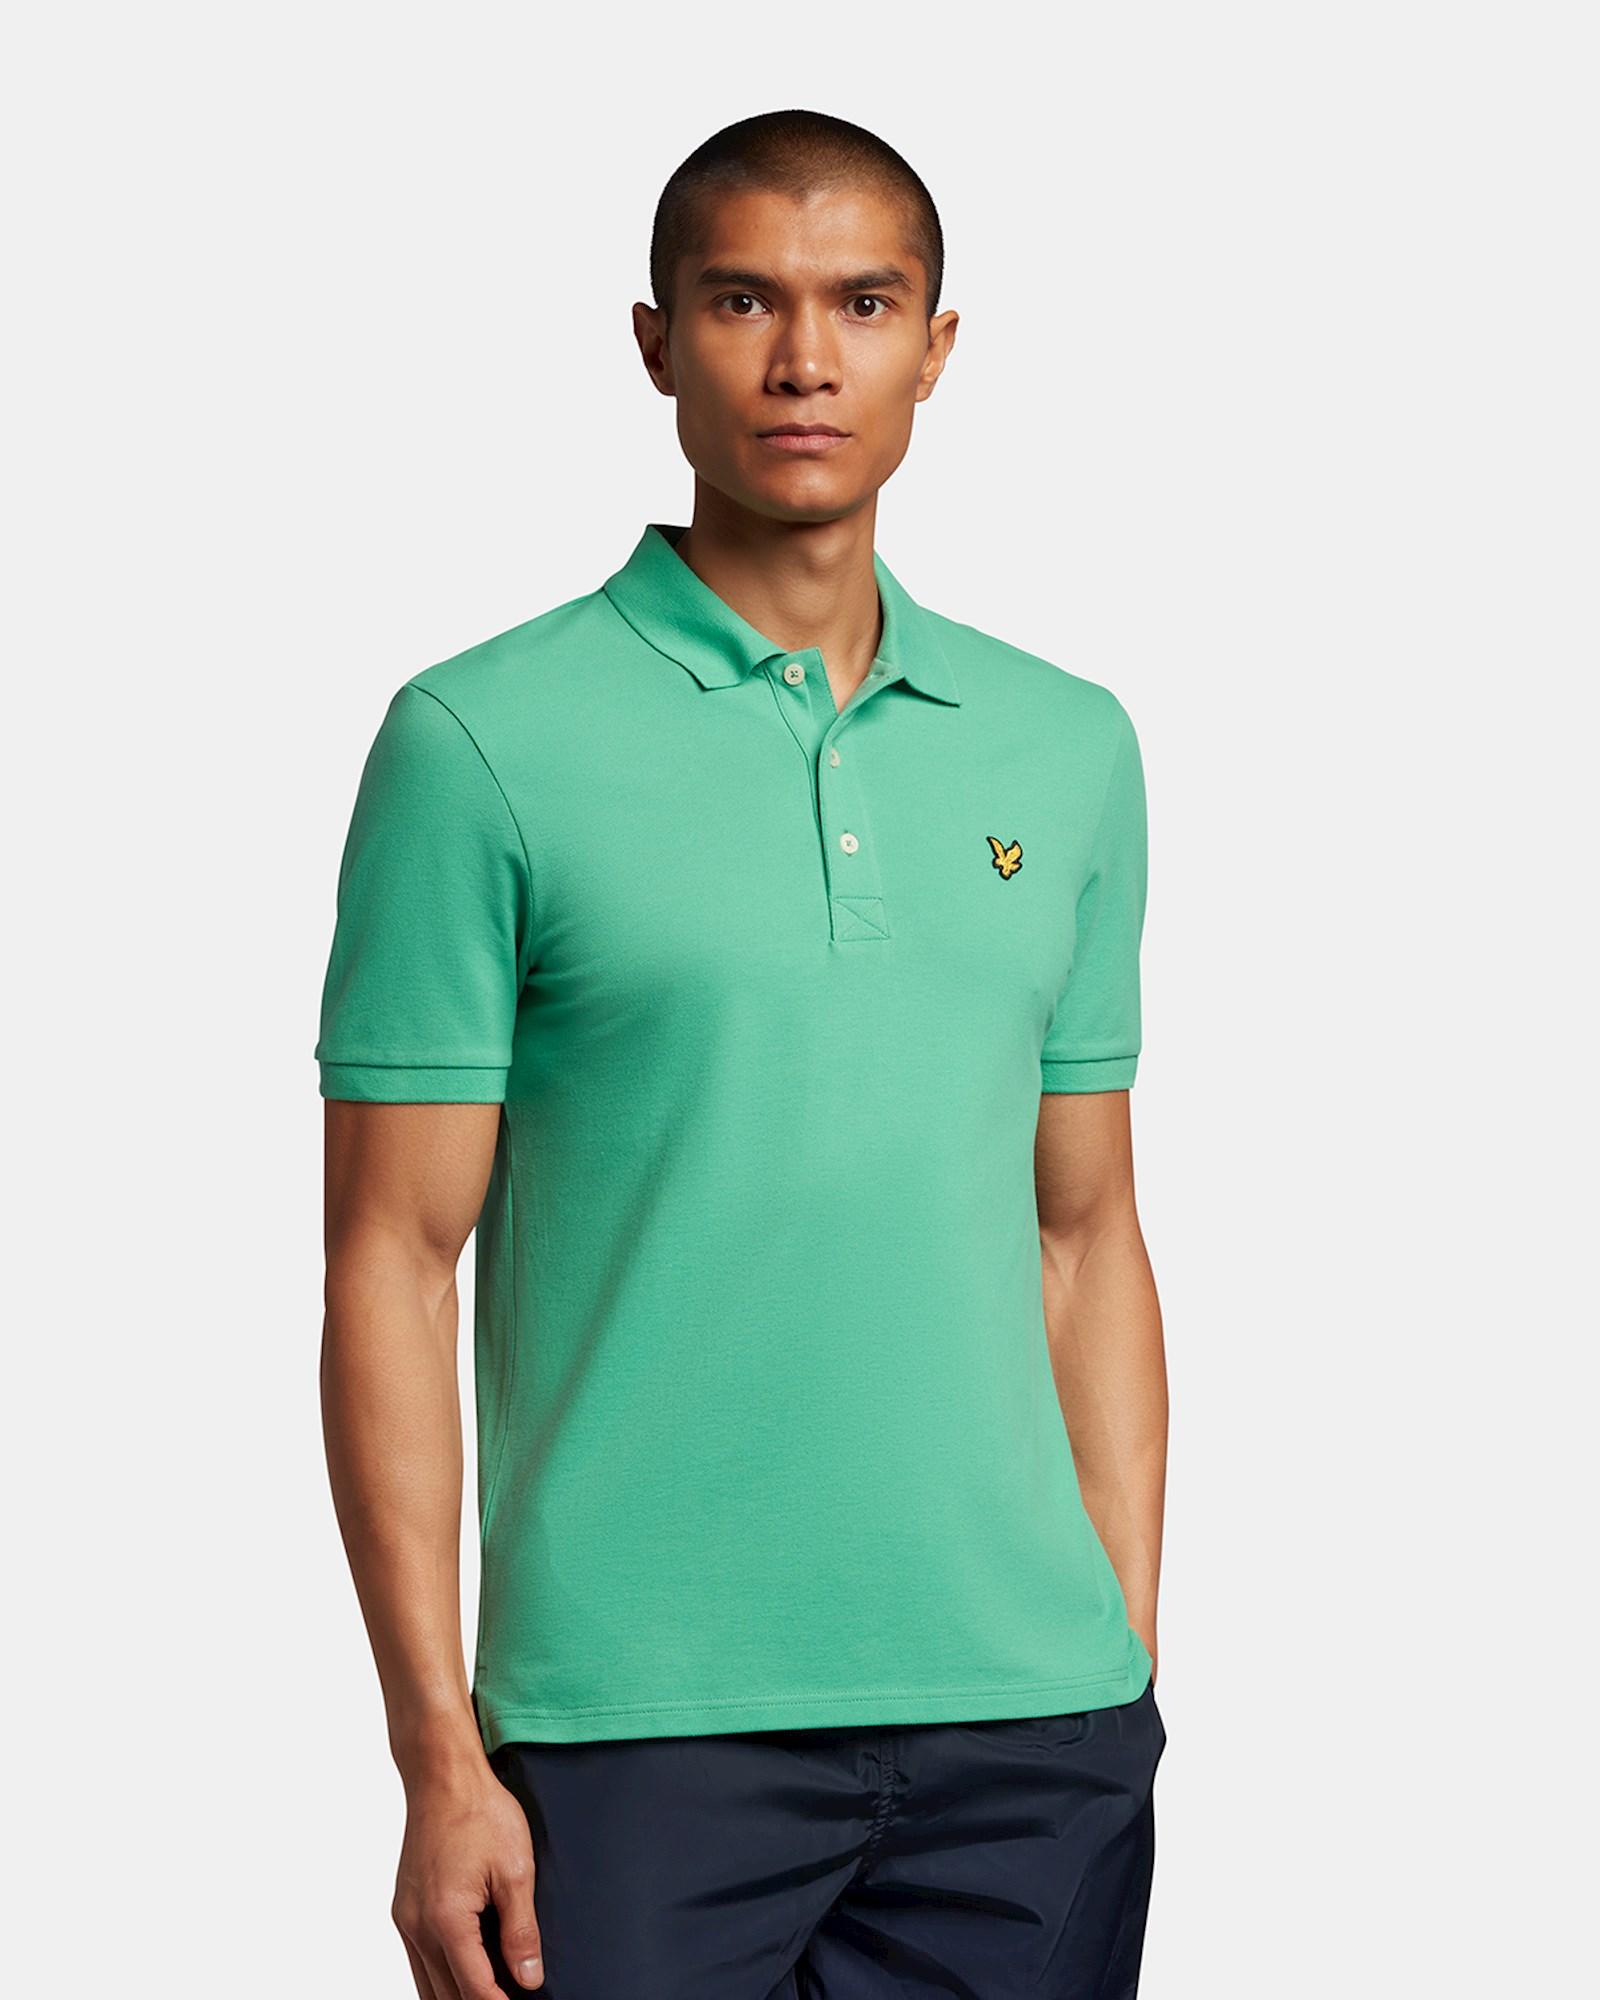 Lyle and Scott polo